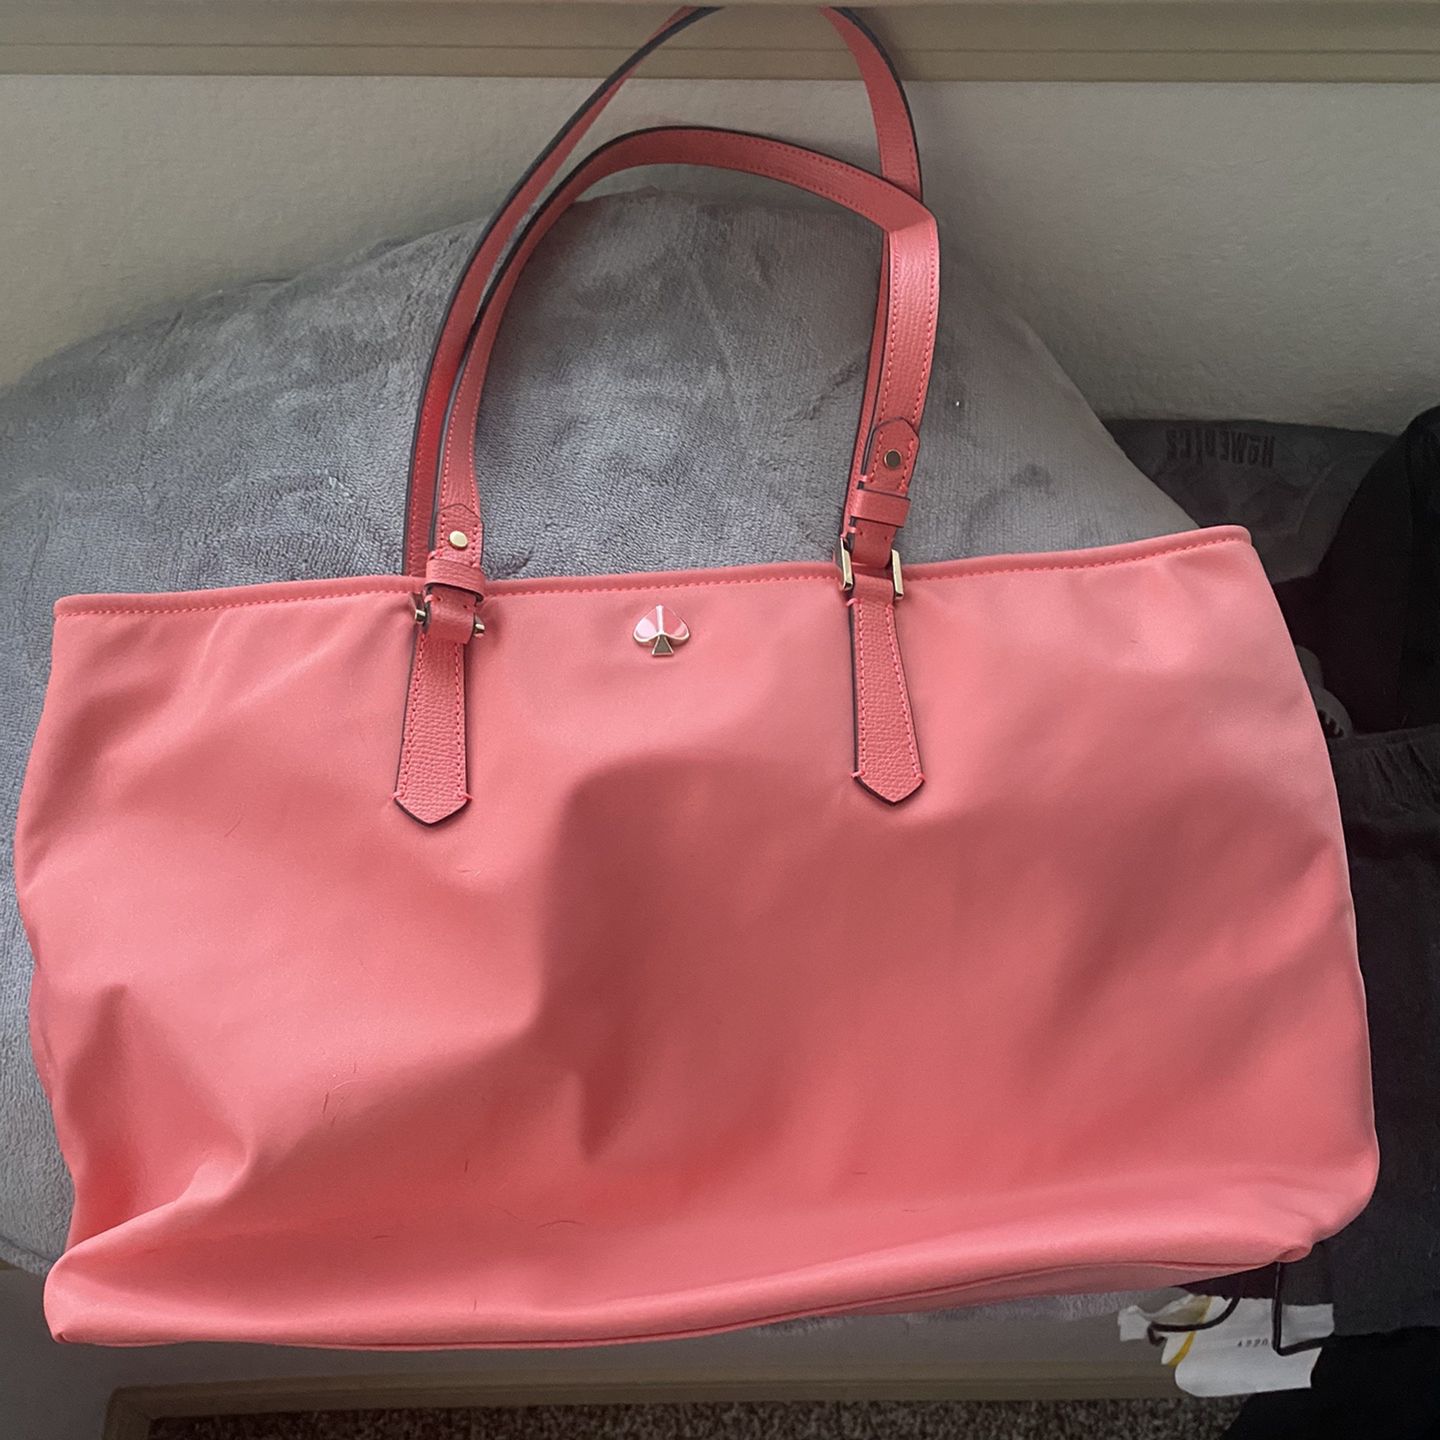 New Nylon Kate Spade Tote for Sale in Albuquerque, NM - OfferUp